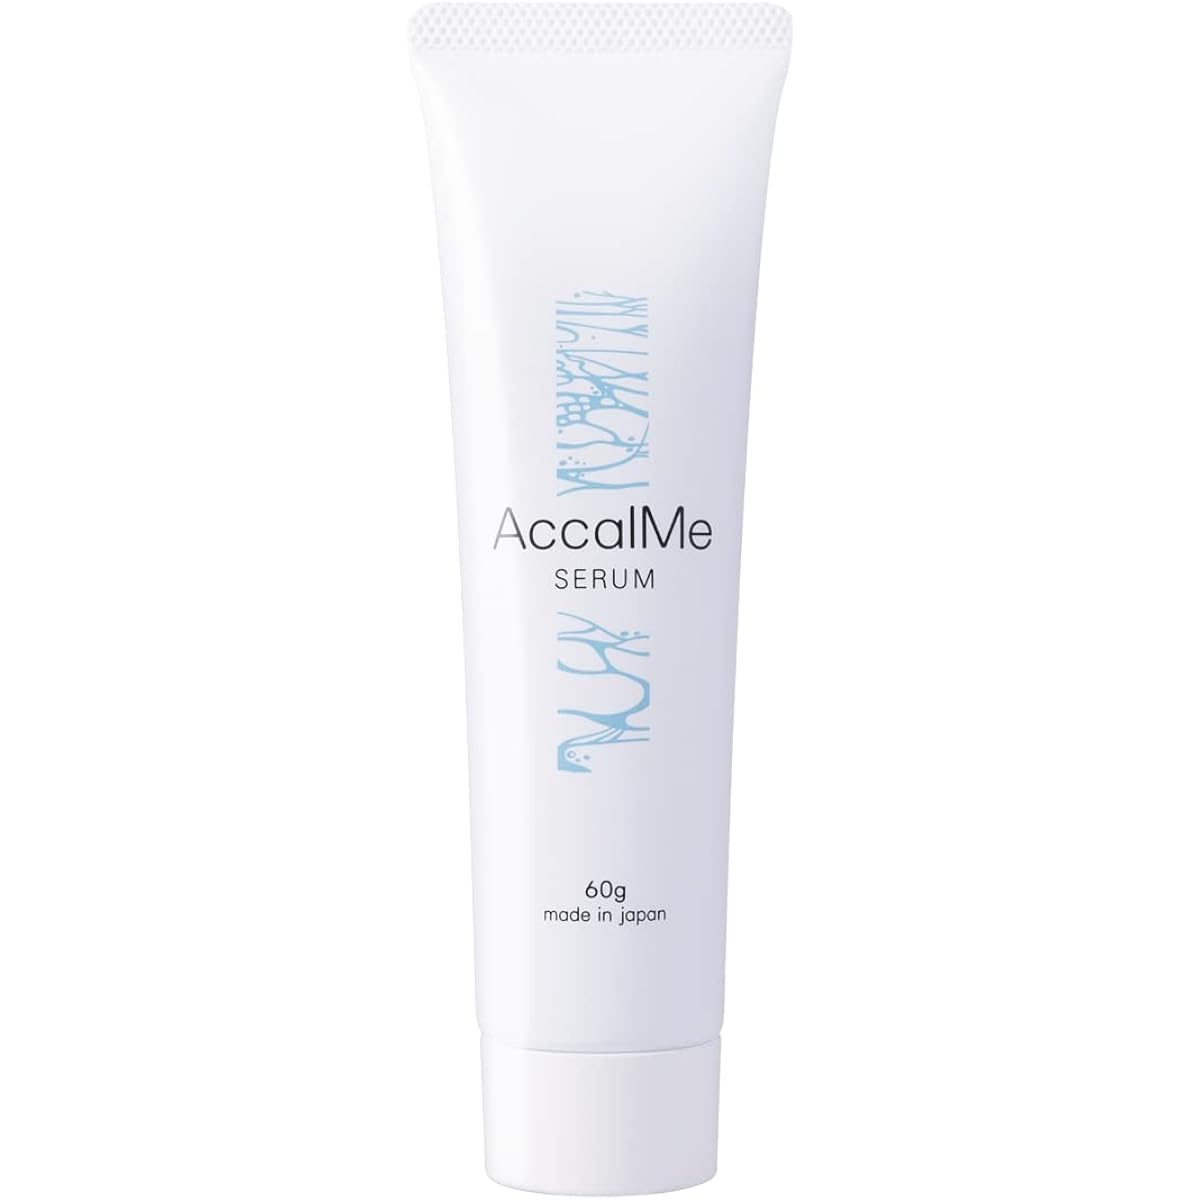 AccalMe Serum Moisturizing Serum for Red Faces (60g) (Made in Japan)